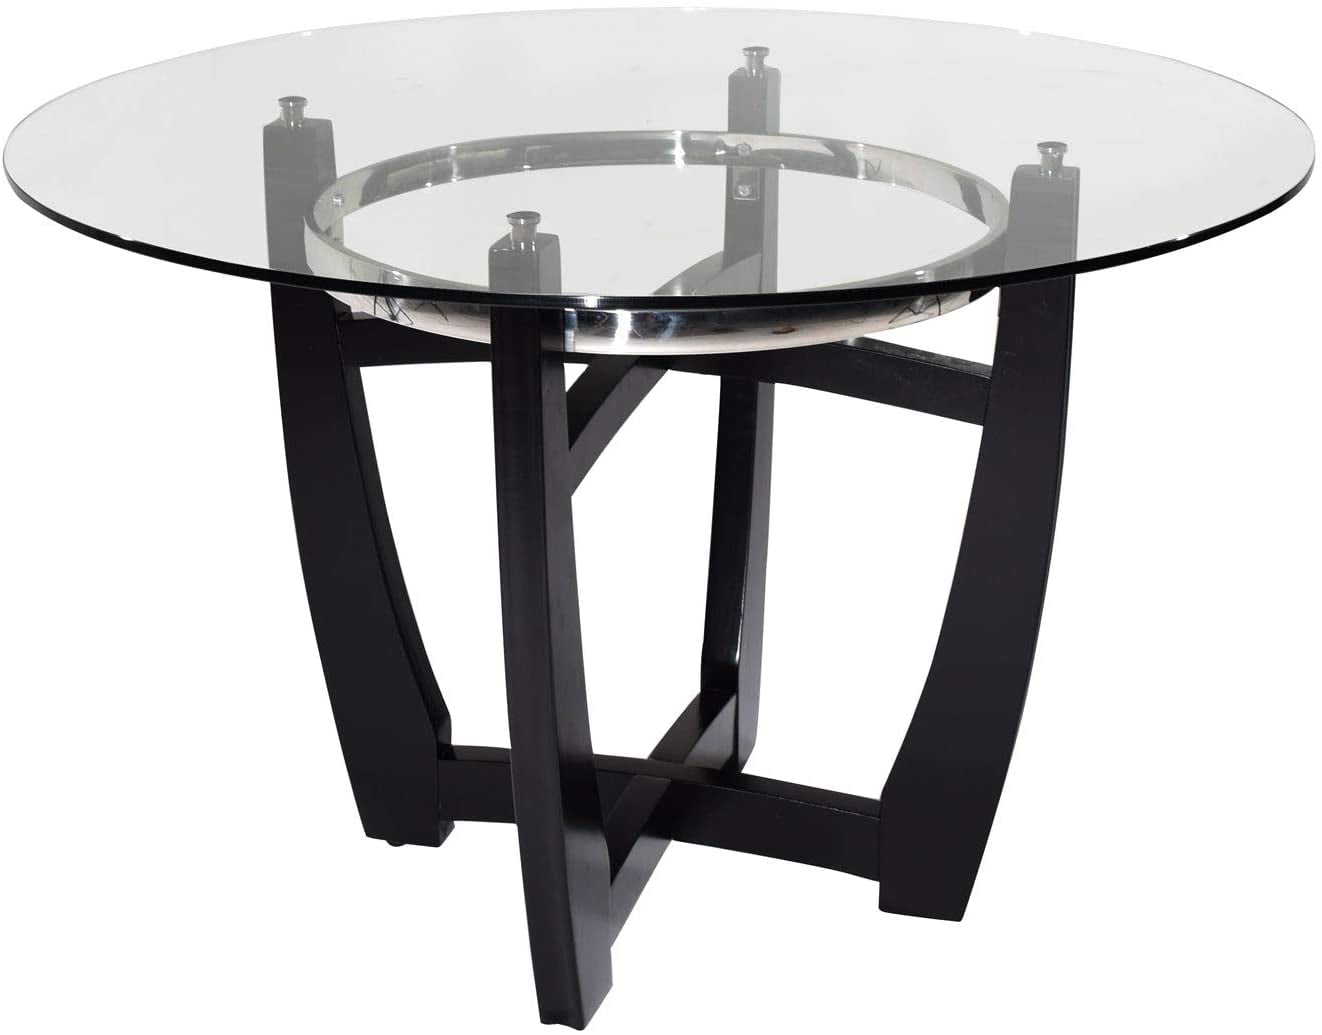 48 Round Dining Table With Tempered, 48 Round Table Base